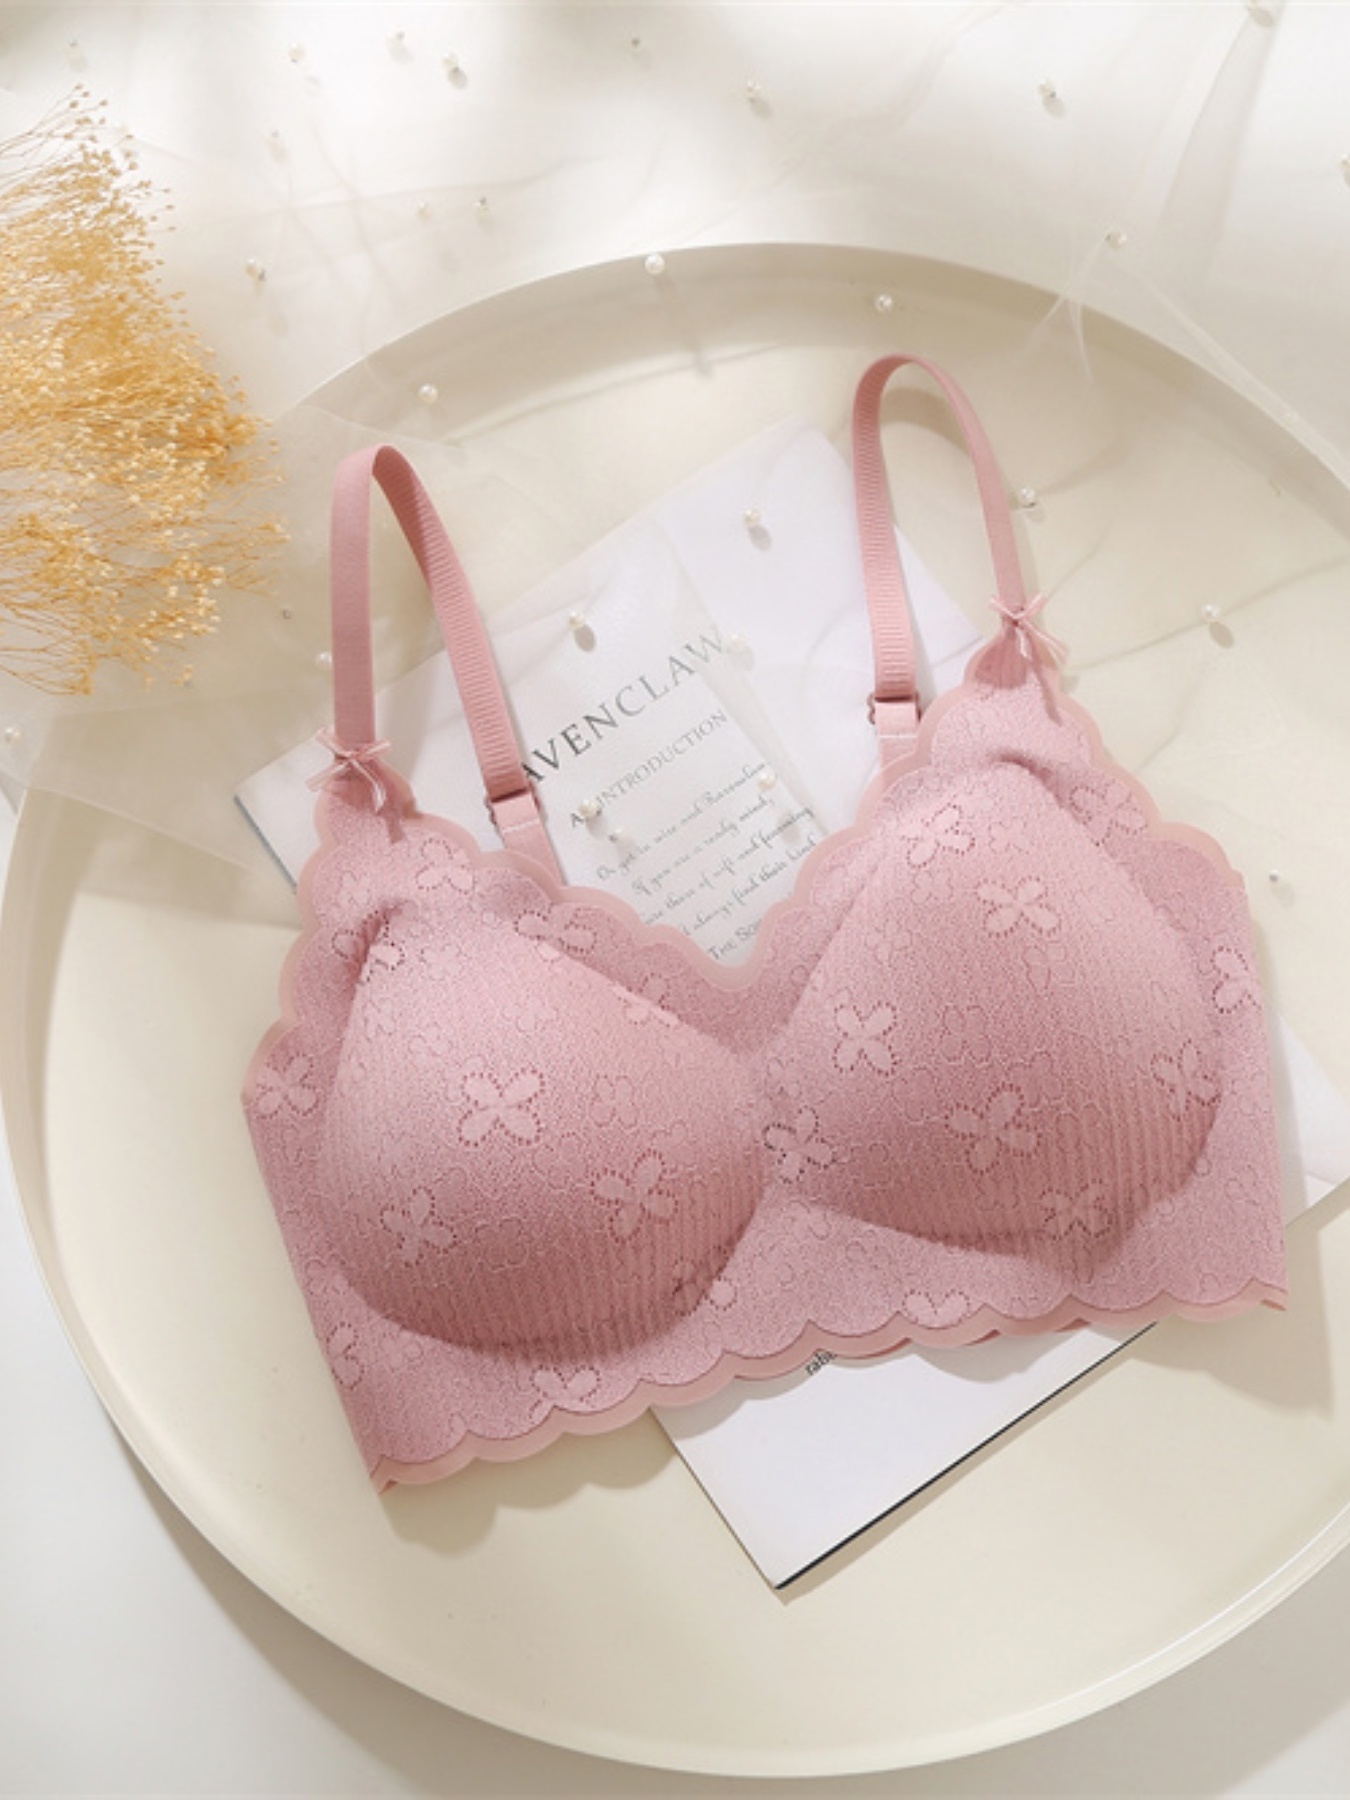  Sweet Curves Wireless Bra, Scalloped Design Natural